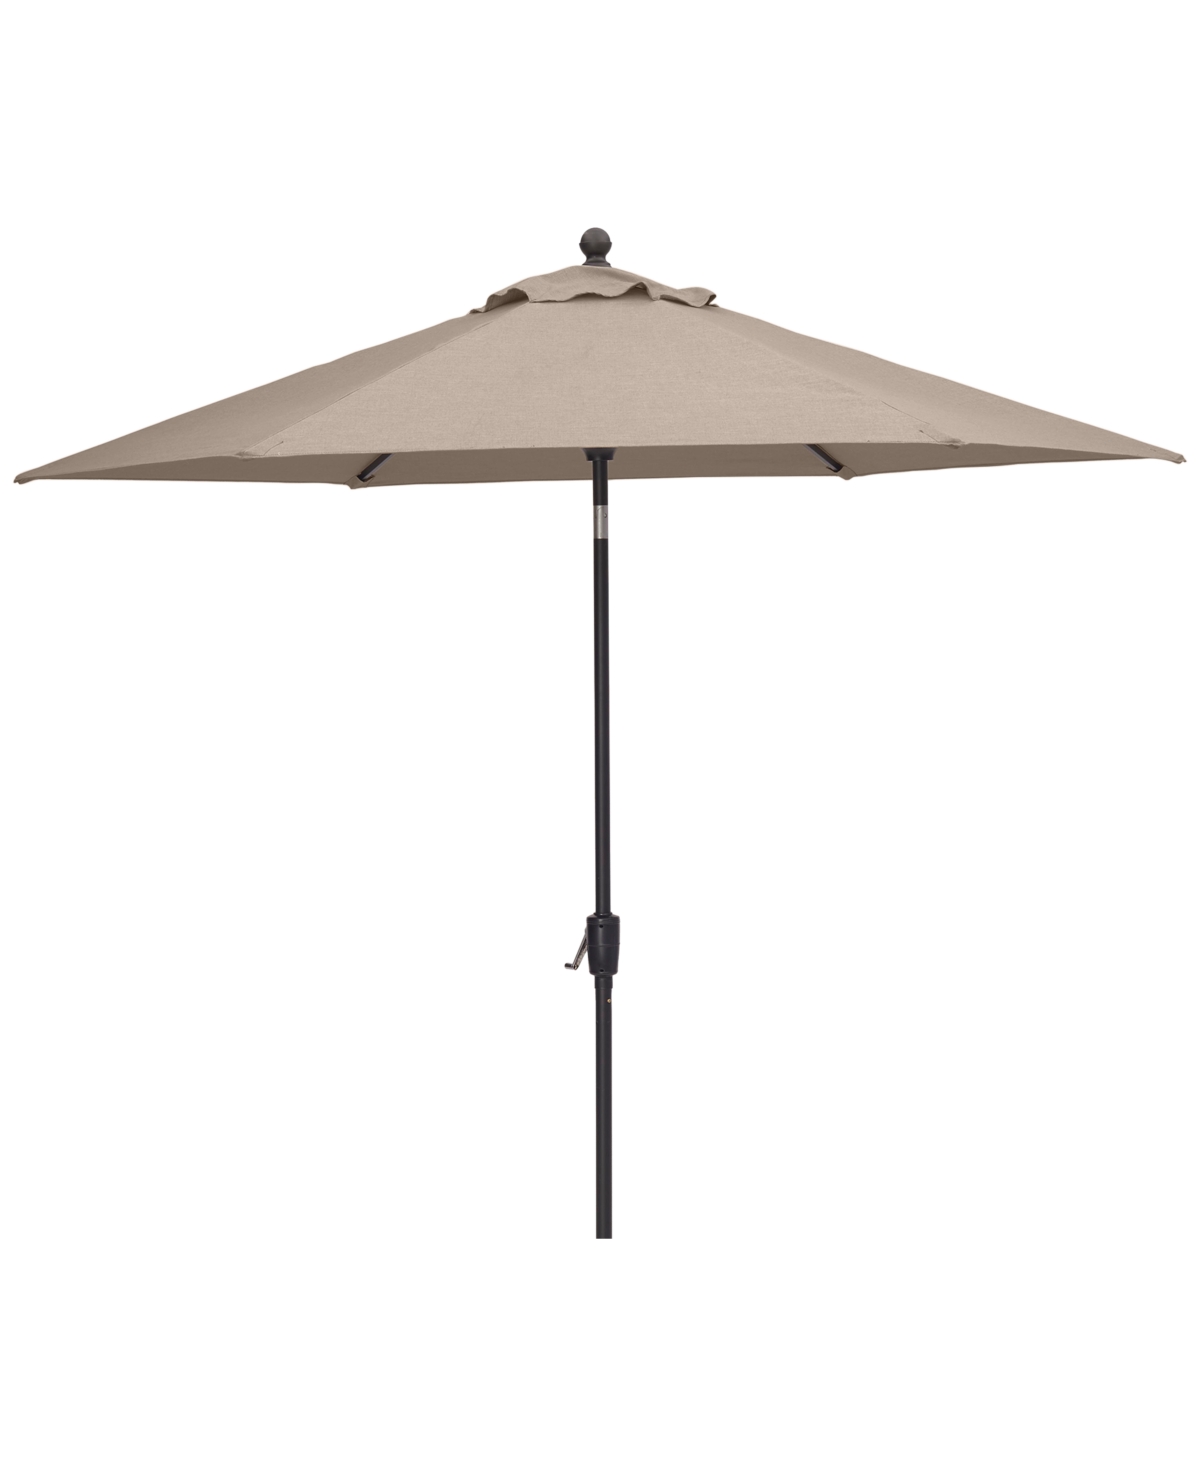 Stockholm Outdoor 11 Umbrella with Outdoor Fabric, Created for Macys